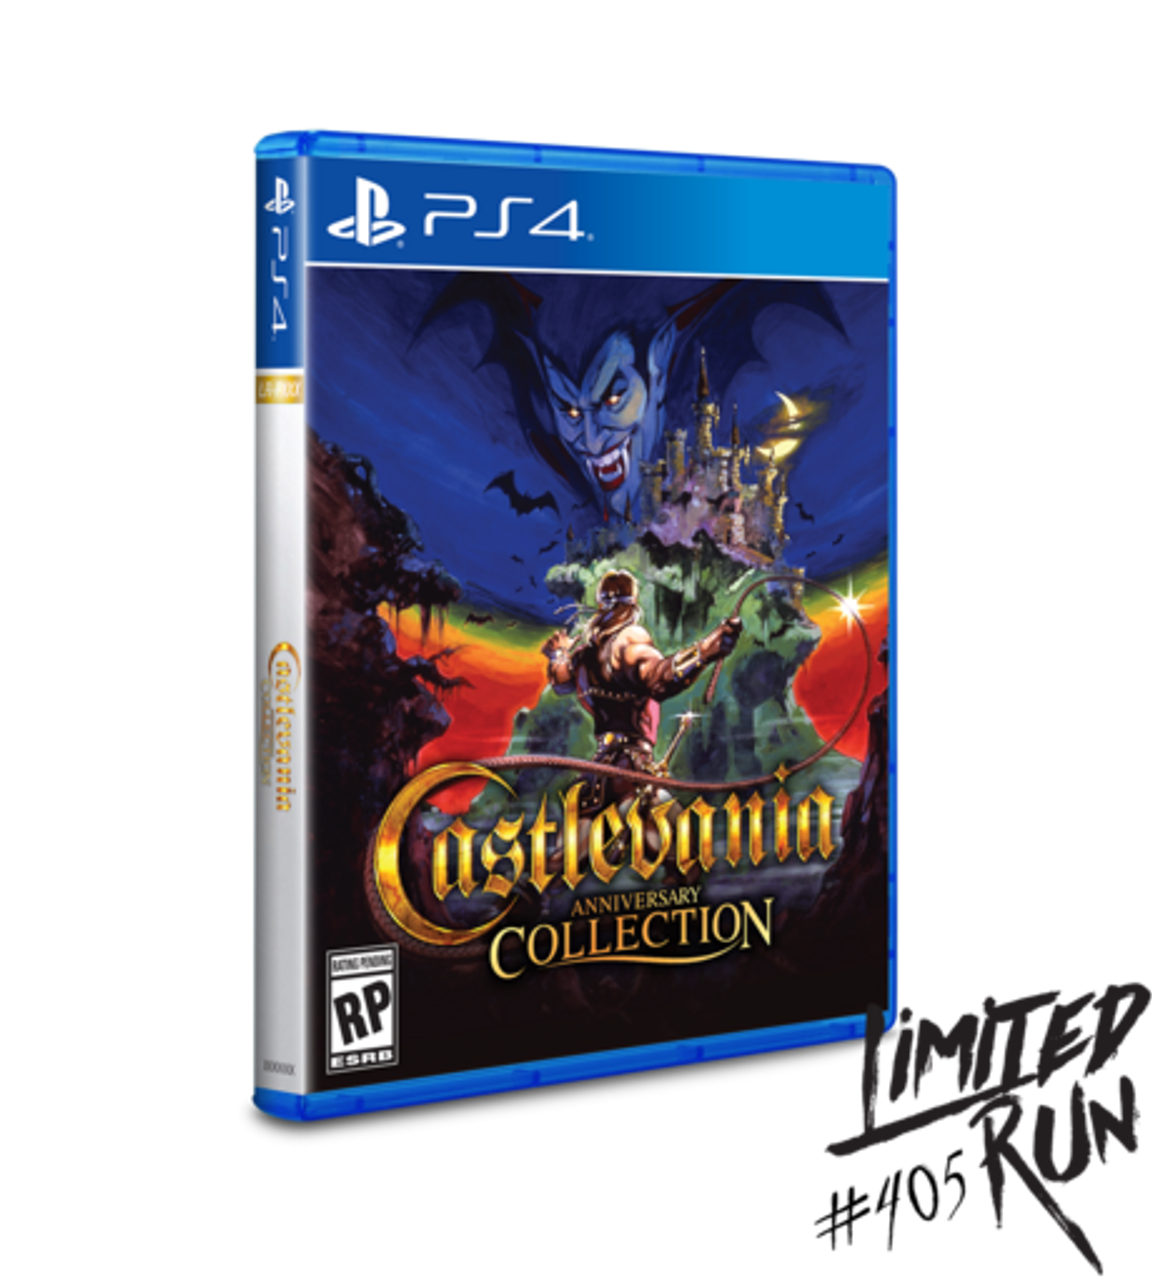 Castlevania Anniversary Collection - Limited Run for PlayStation 4 available Videogamesnewyork, NY